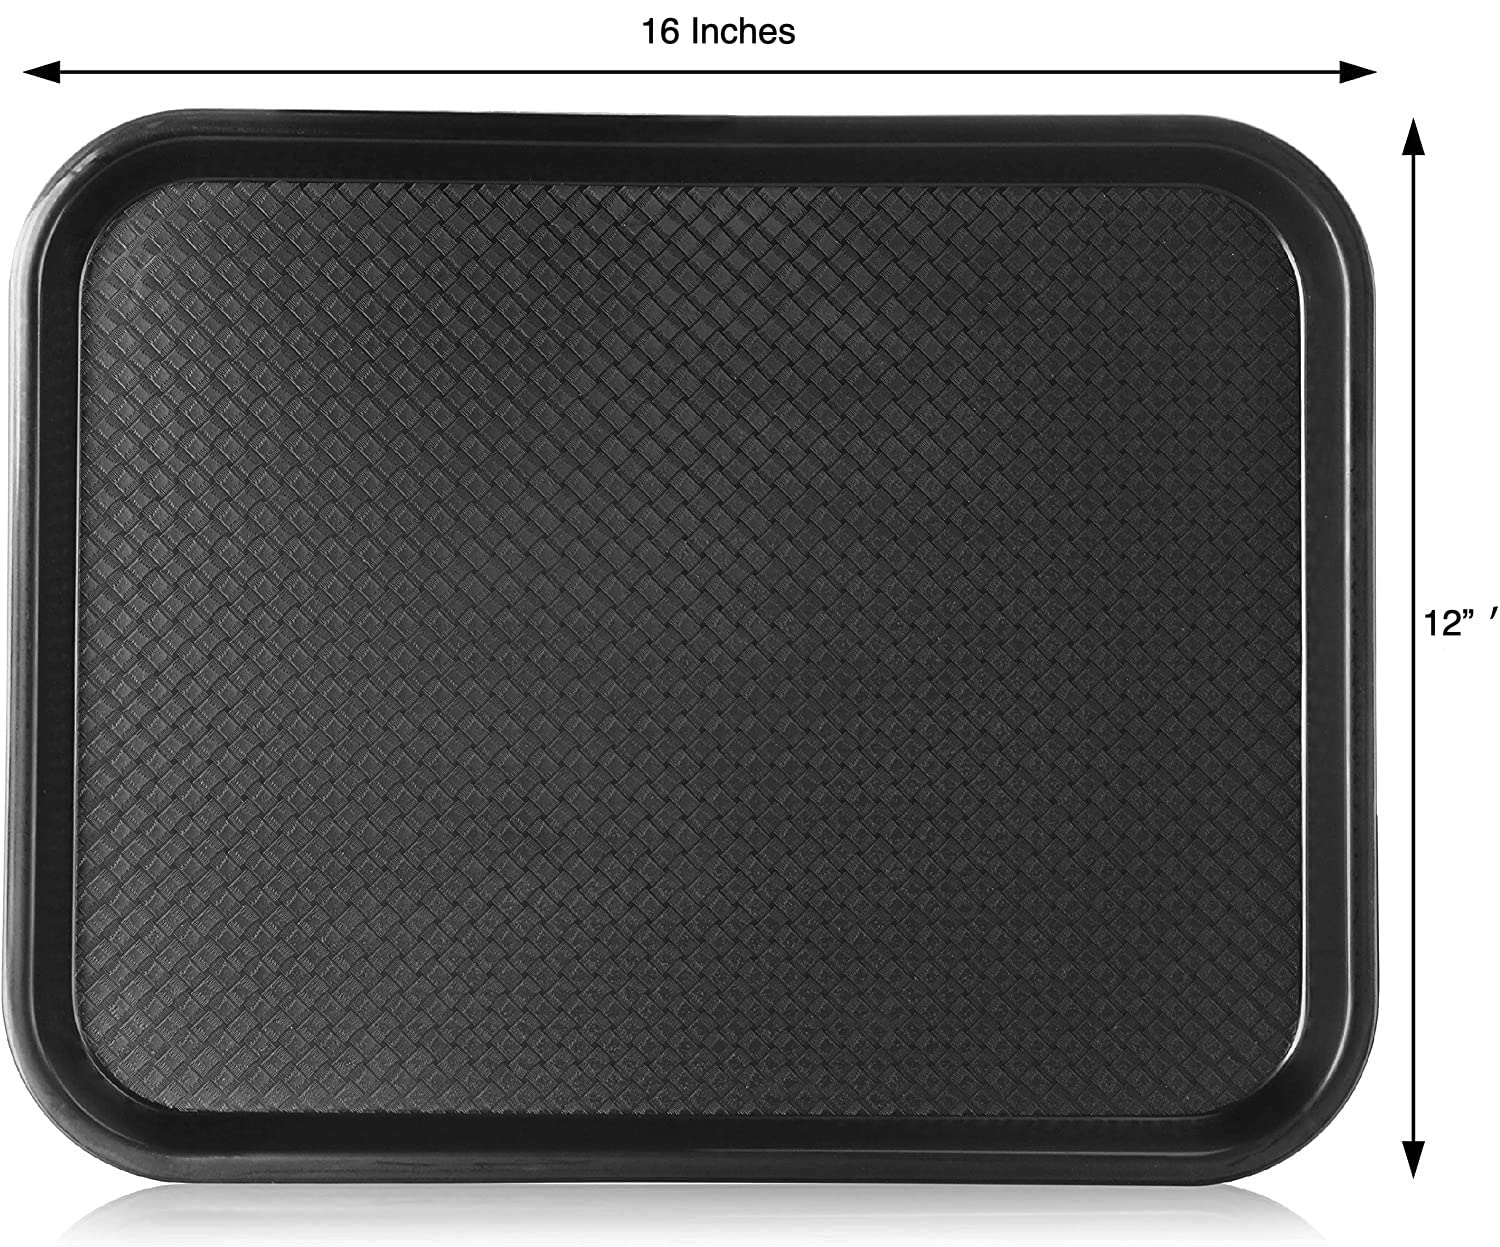 NJ Plastic Serving Platter Large Tray Unbreakable Snacks Tea Serving Tray Black Drink Breakfast Tea Dinner Coffee Salad Food for Dinning Table Home Kitchen (16 X 12 Inches) : 3 Pcs.